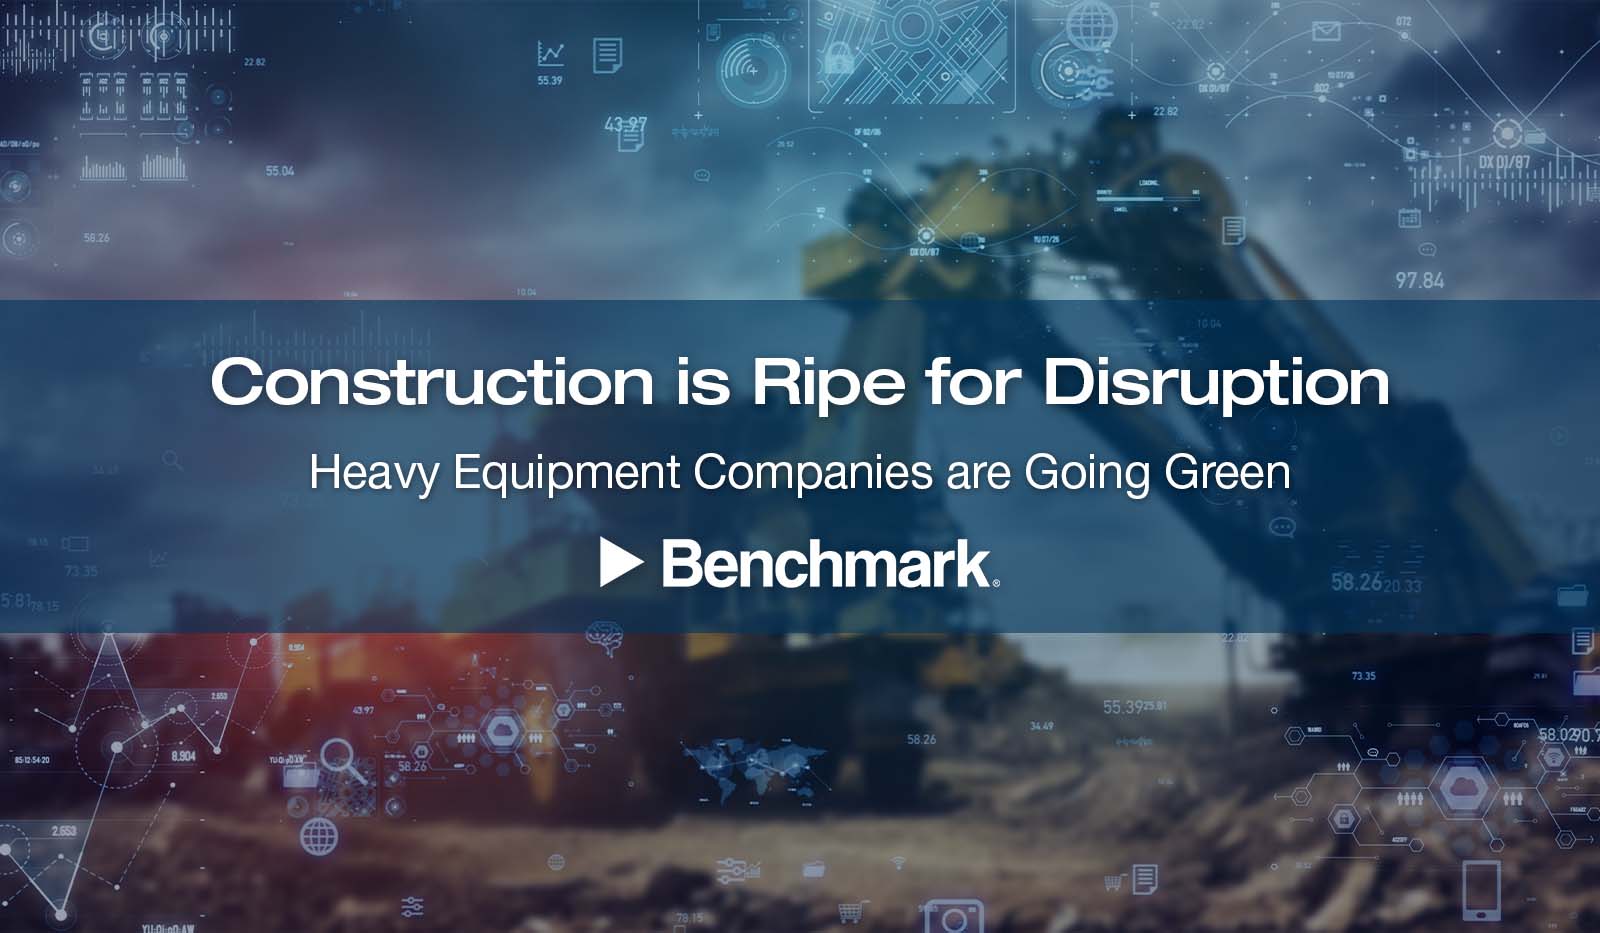 Construction is Ripe for Disruption